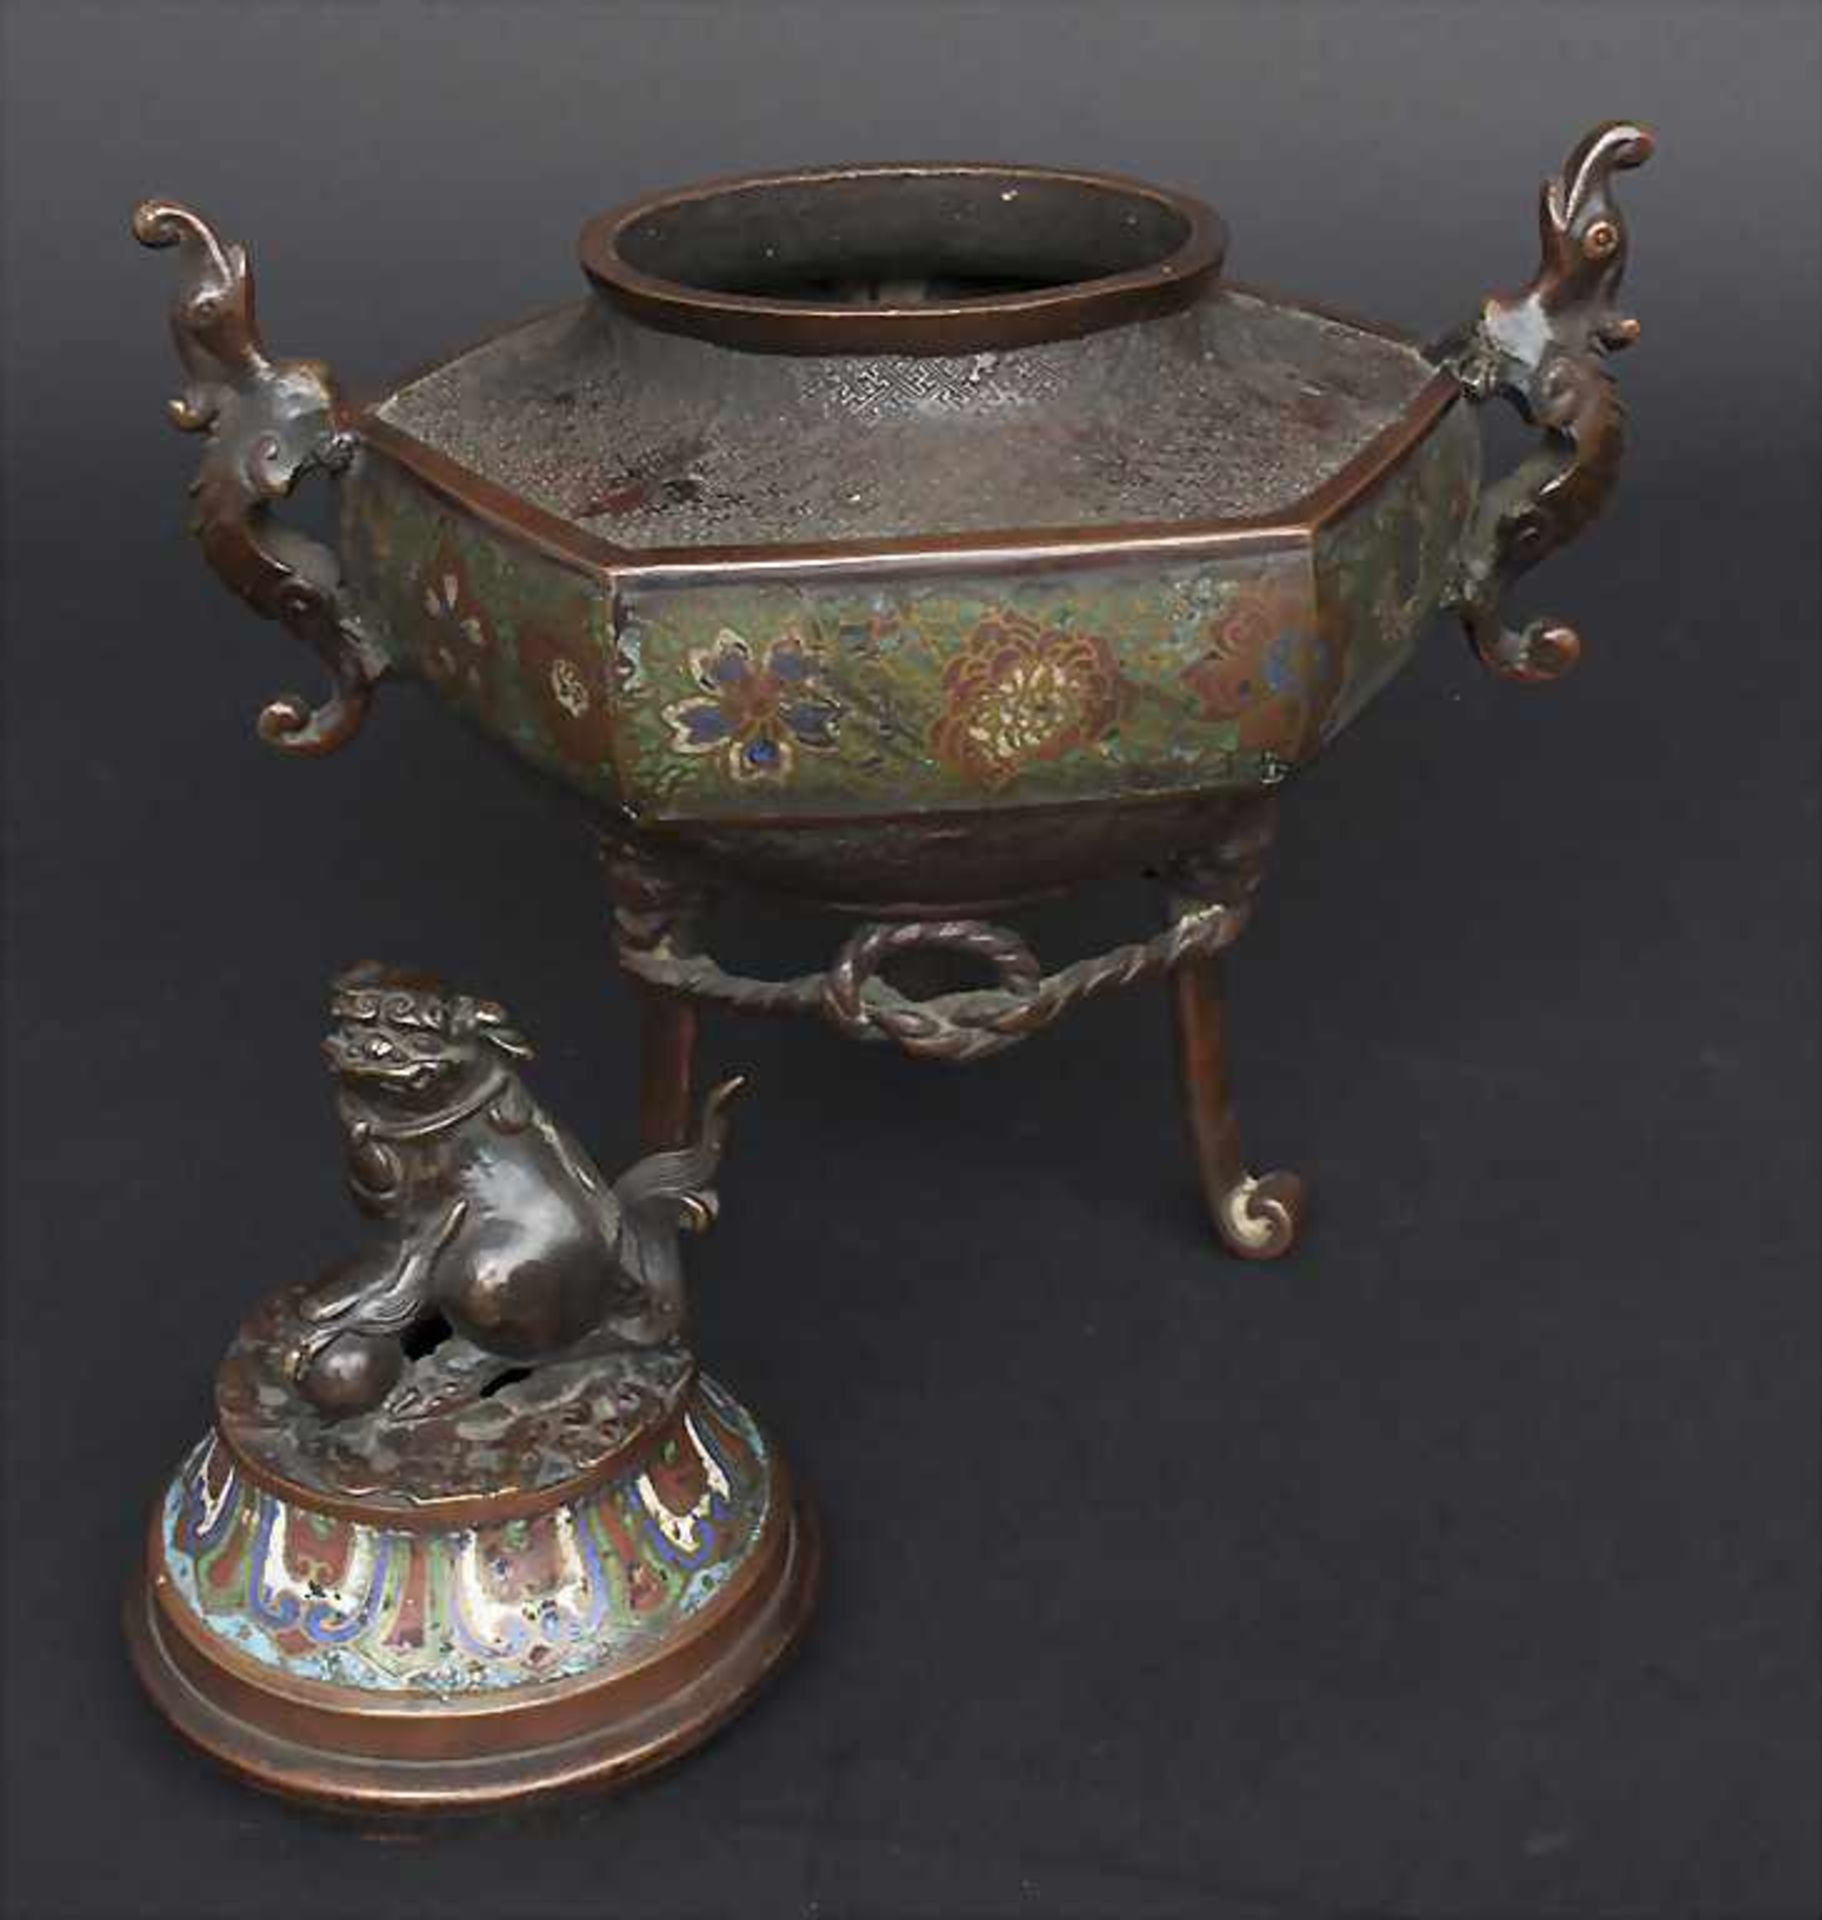 Cloisonné Weihrauchbrenner mit Shishi / A Cloisonné incense burner with Shishi, China, 19. Jh. - Image 6 of 8